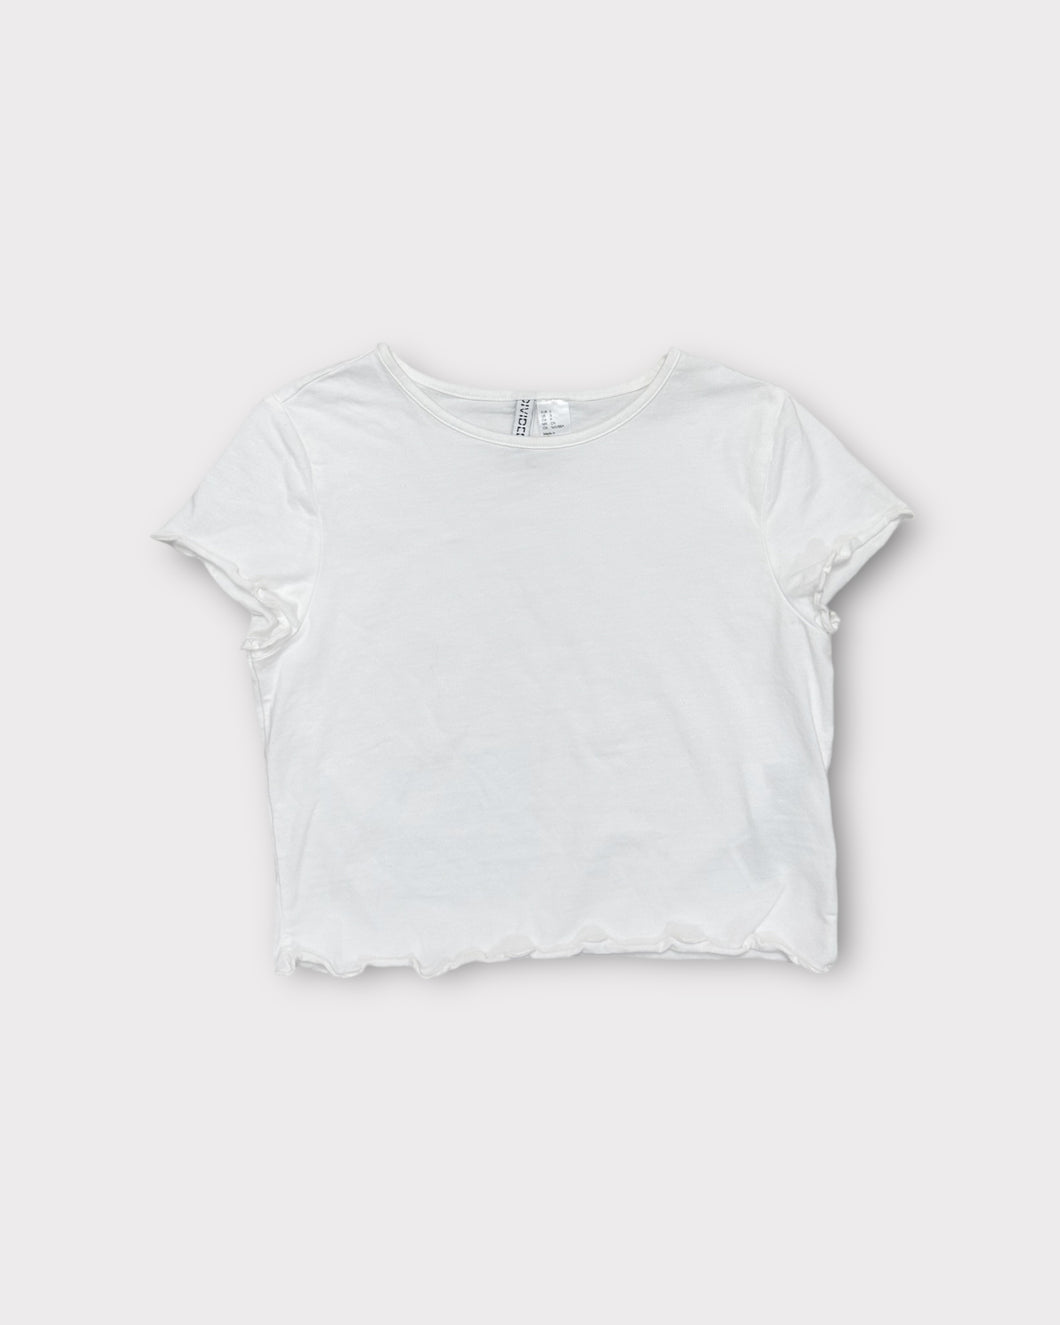 Divided White Crop Top with Lettuce Trim (S)